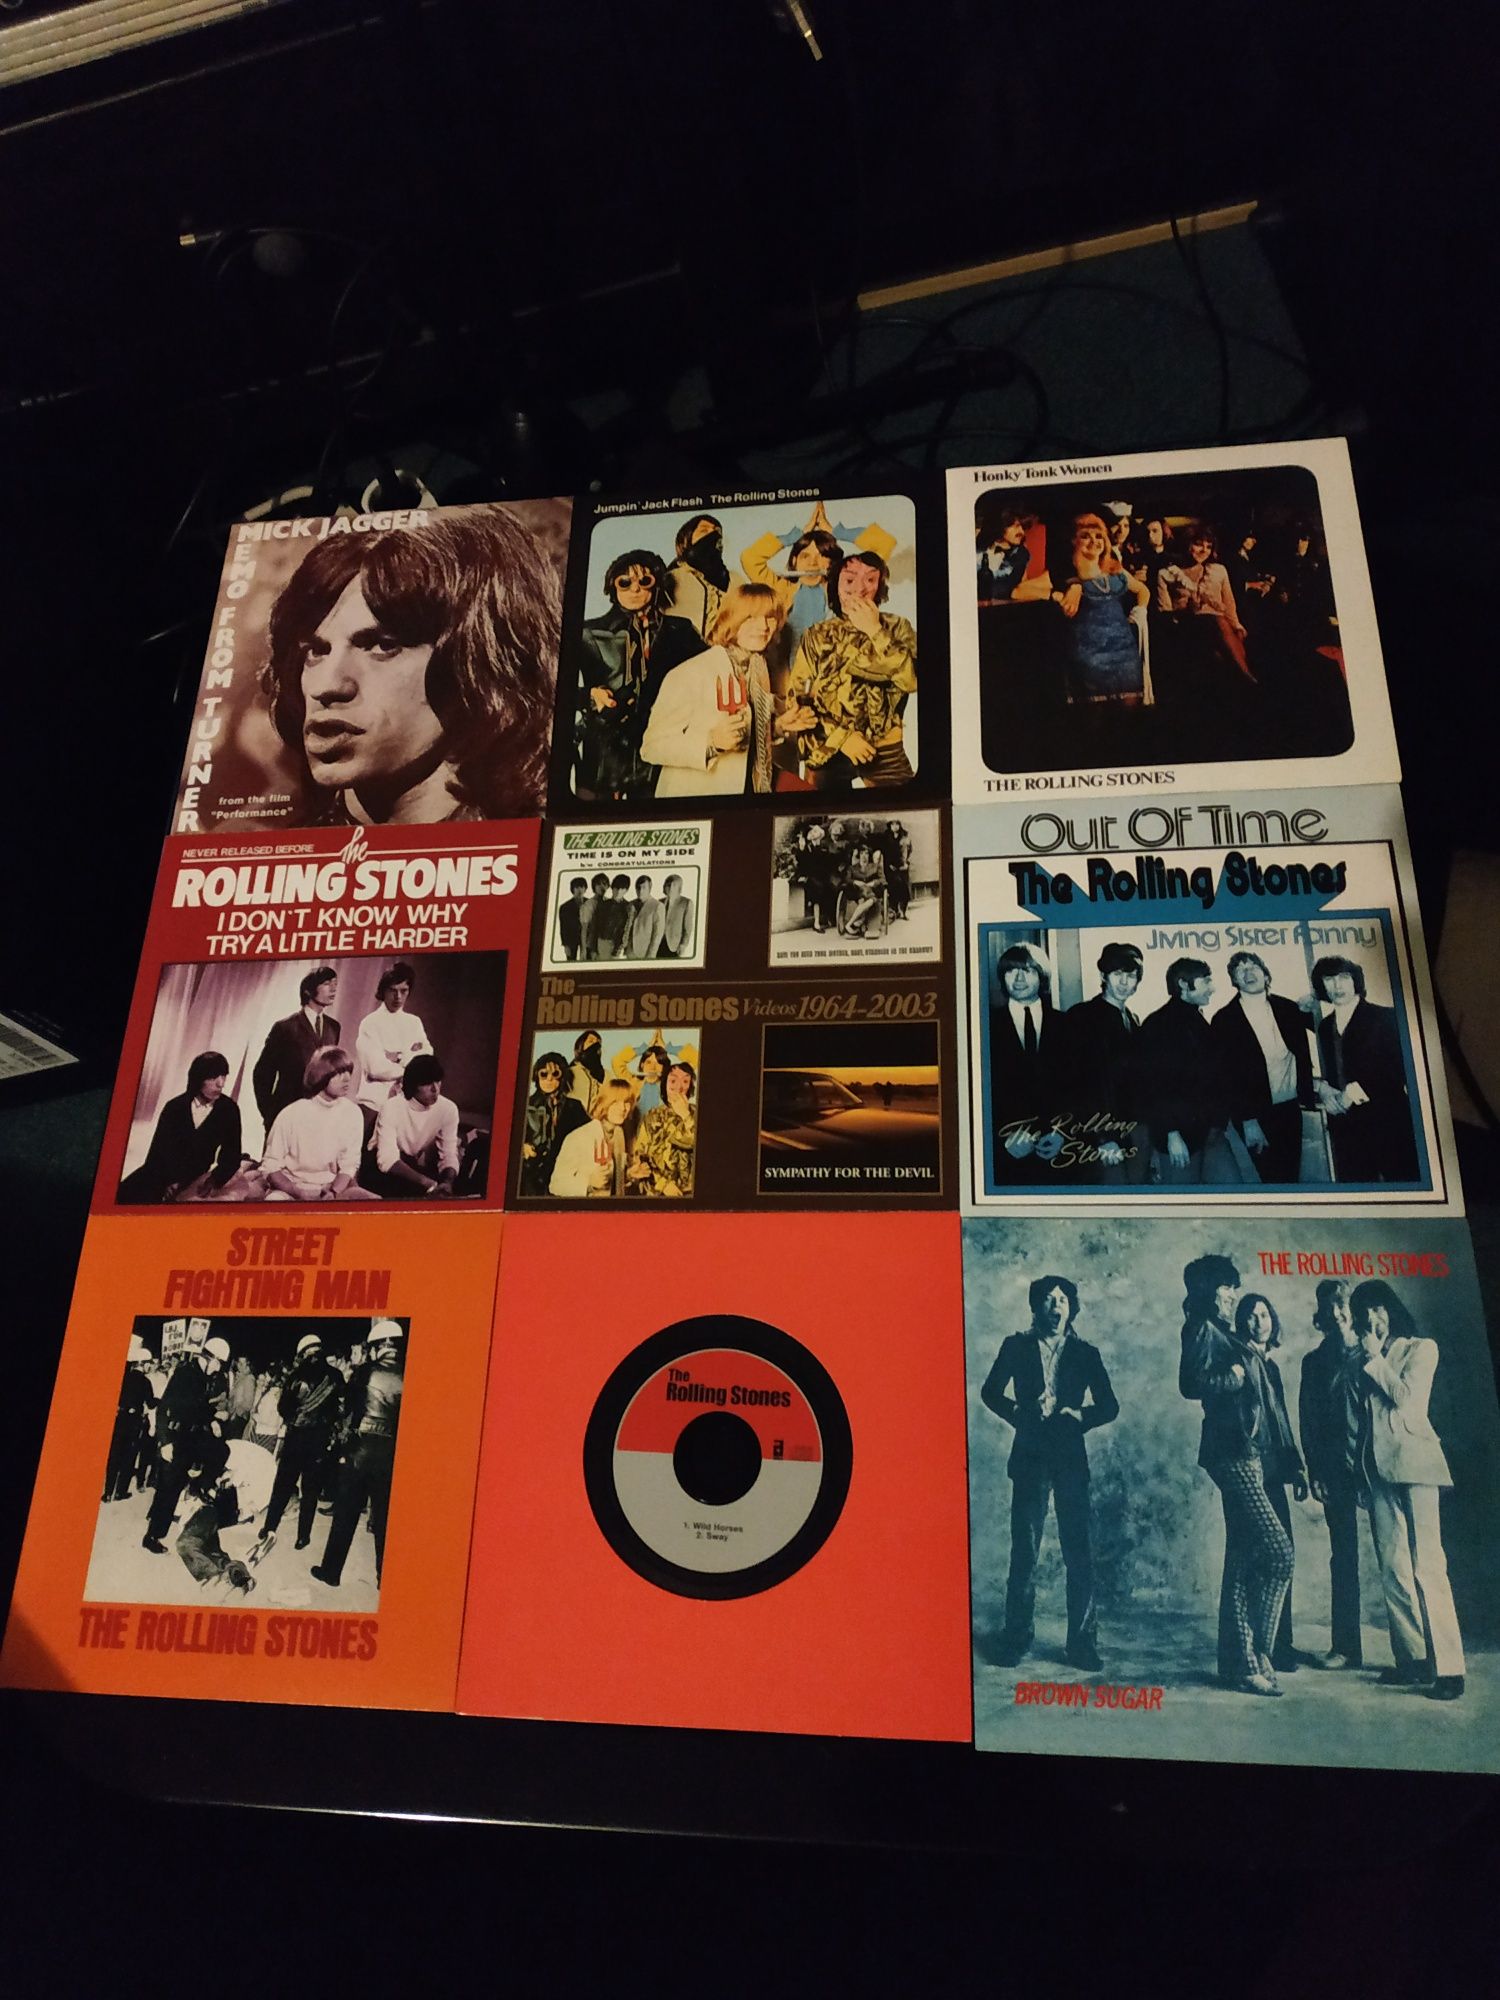 The Rolling Stones - Singles 1968-71